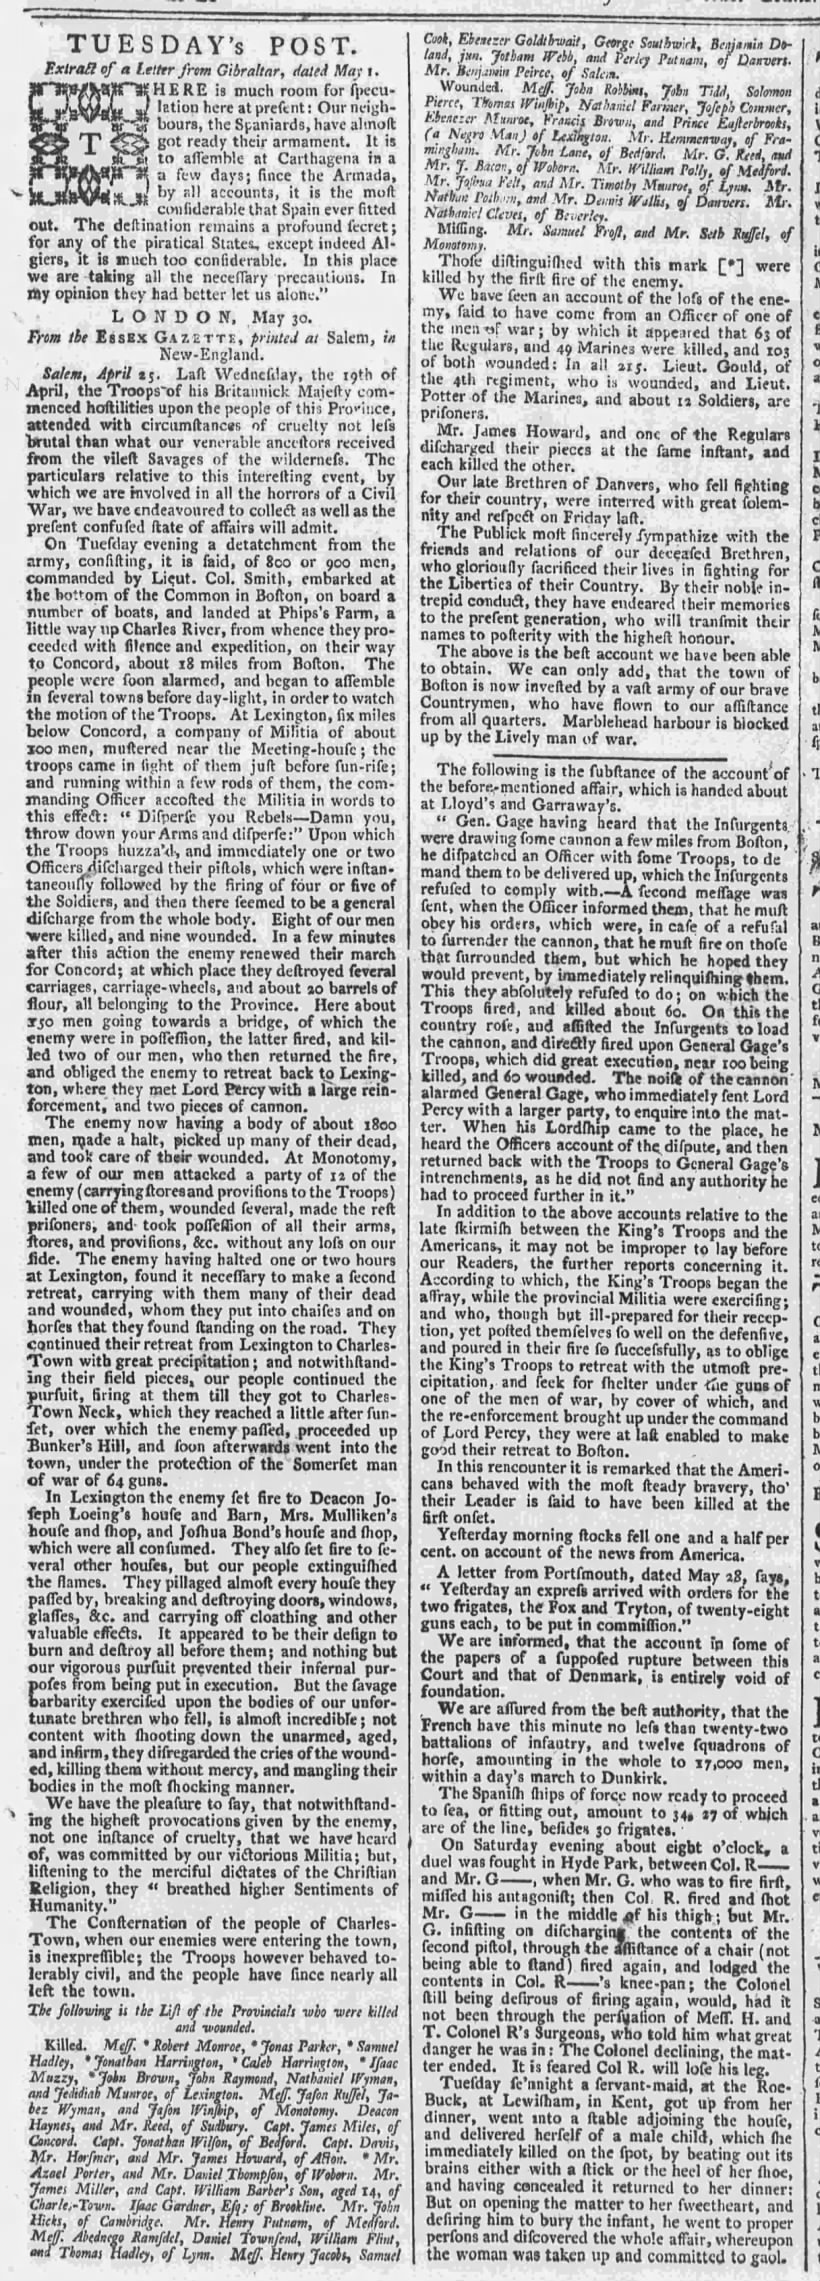 American account of Battles of Lexington and Concord, including list of killed and wounded